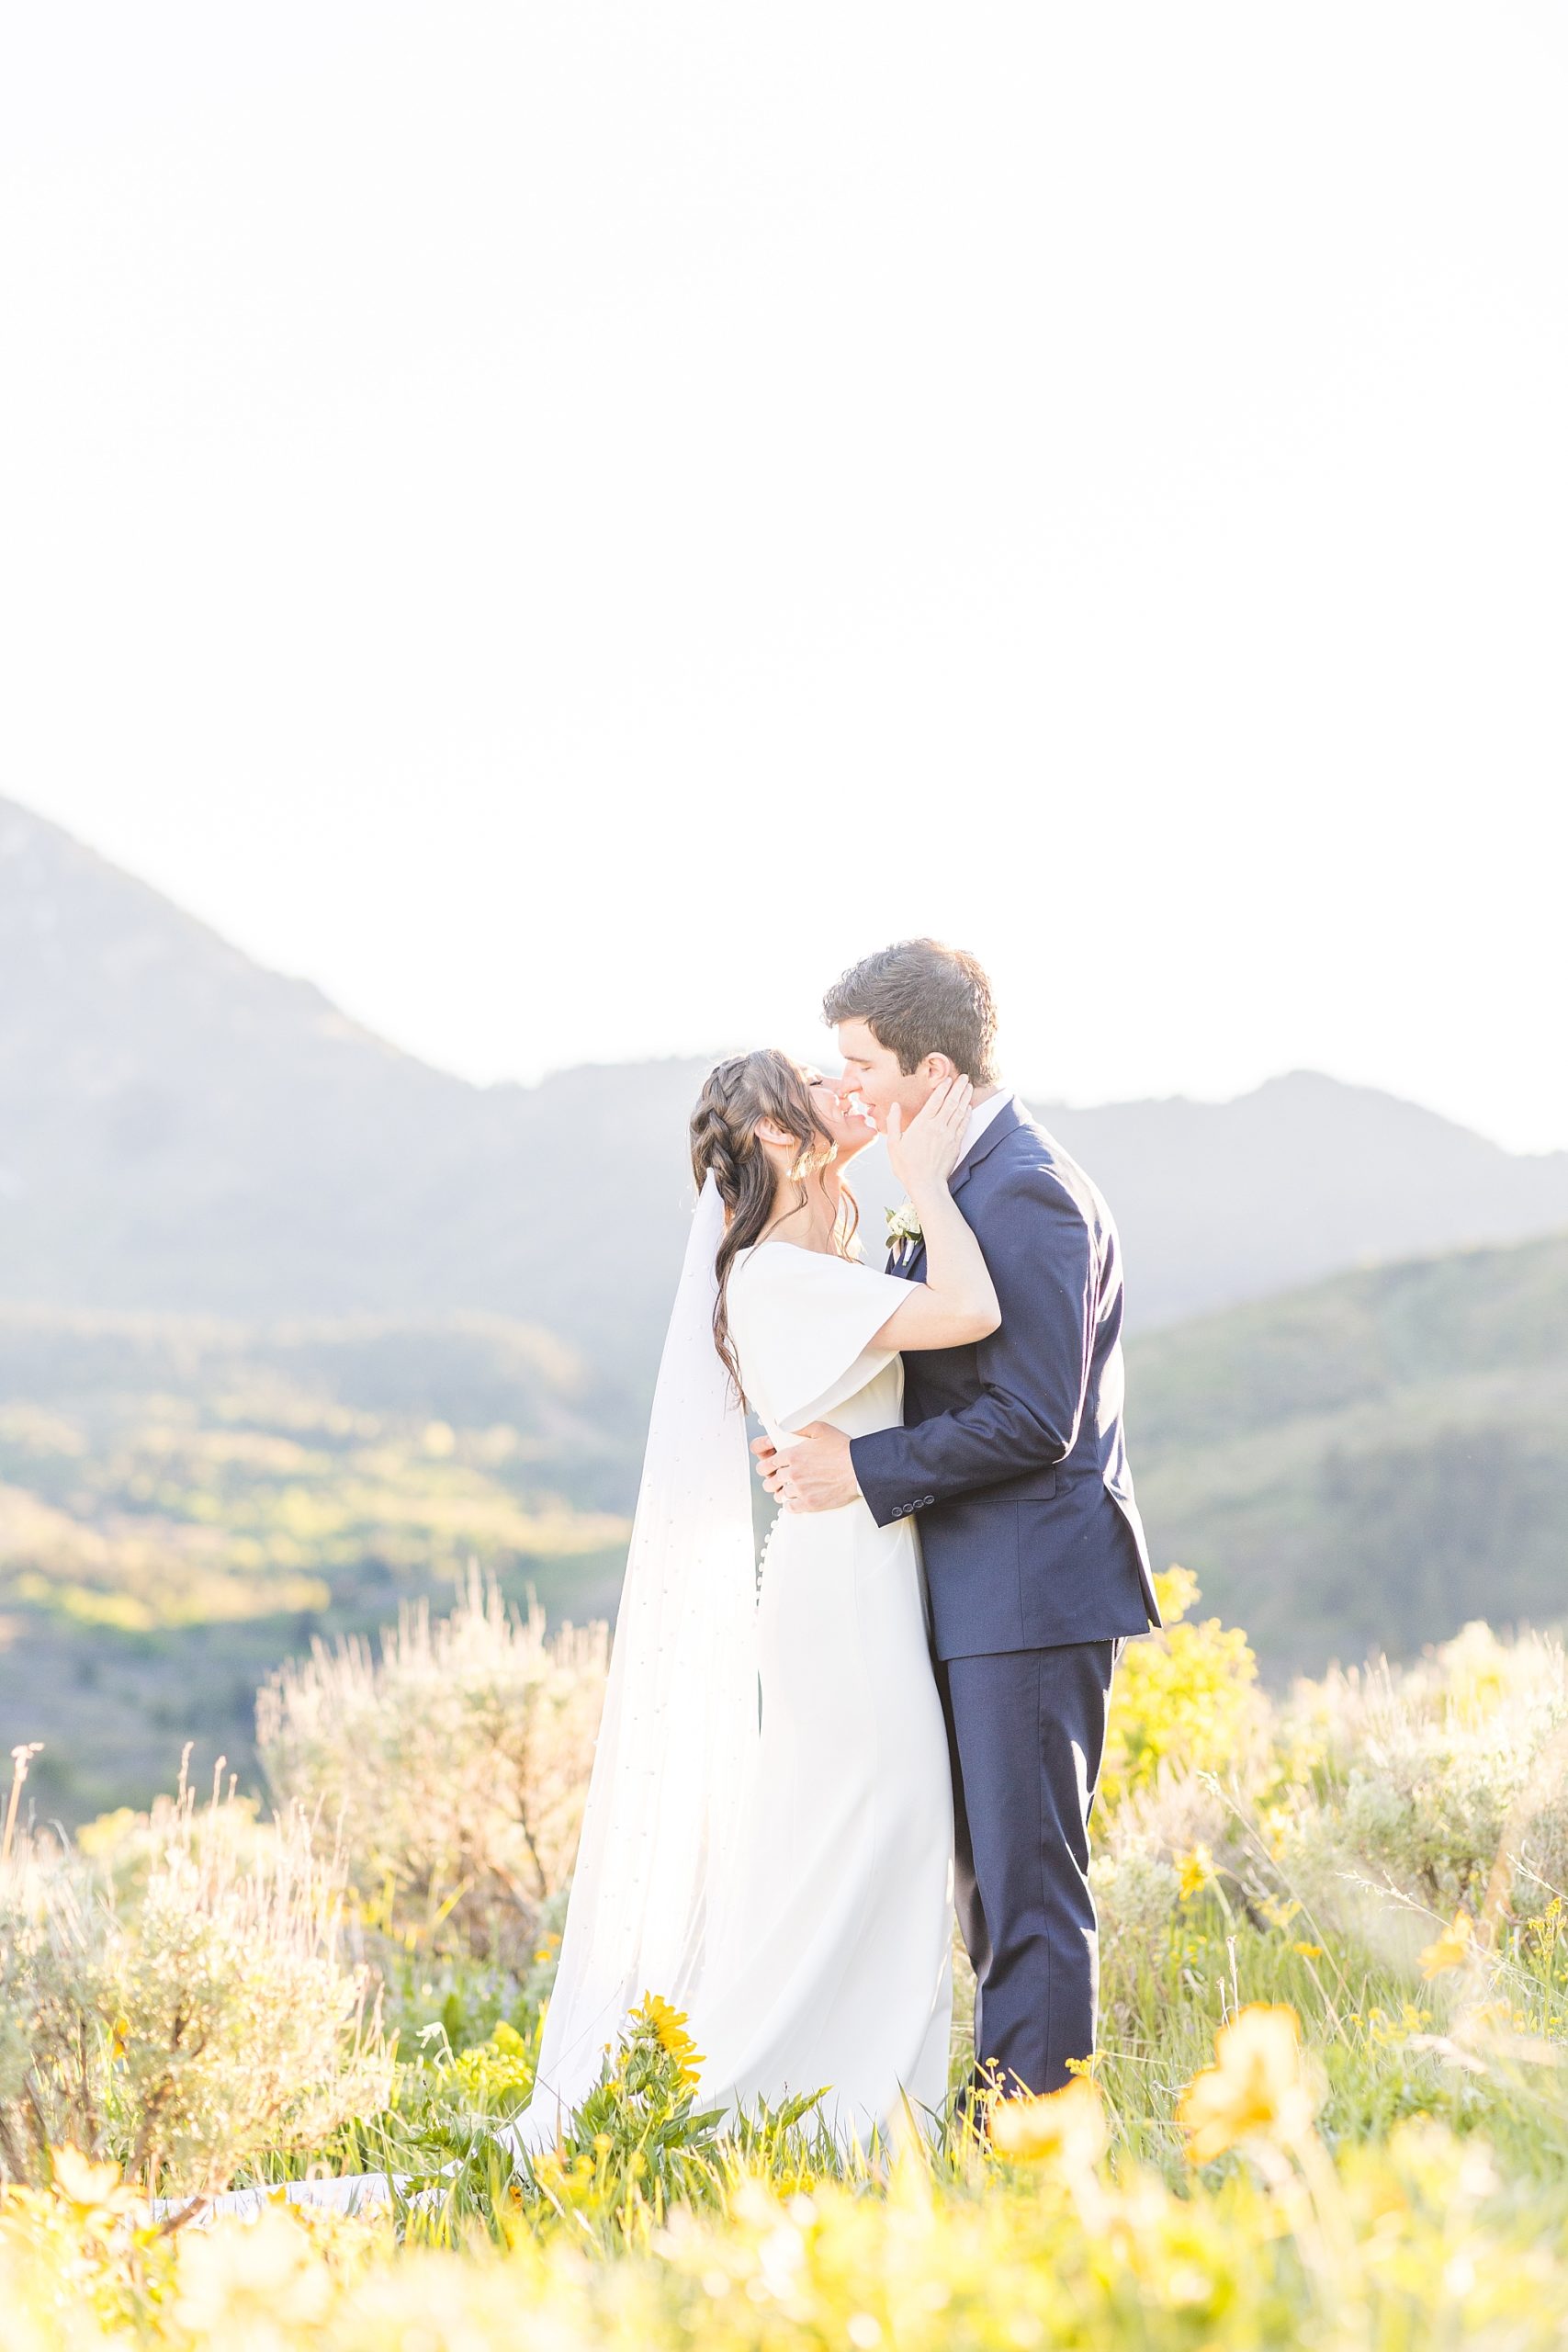 Wedding in the mountains during the summer in Utah